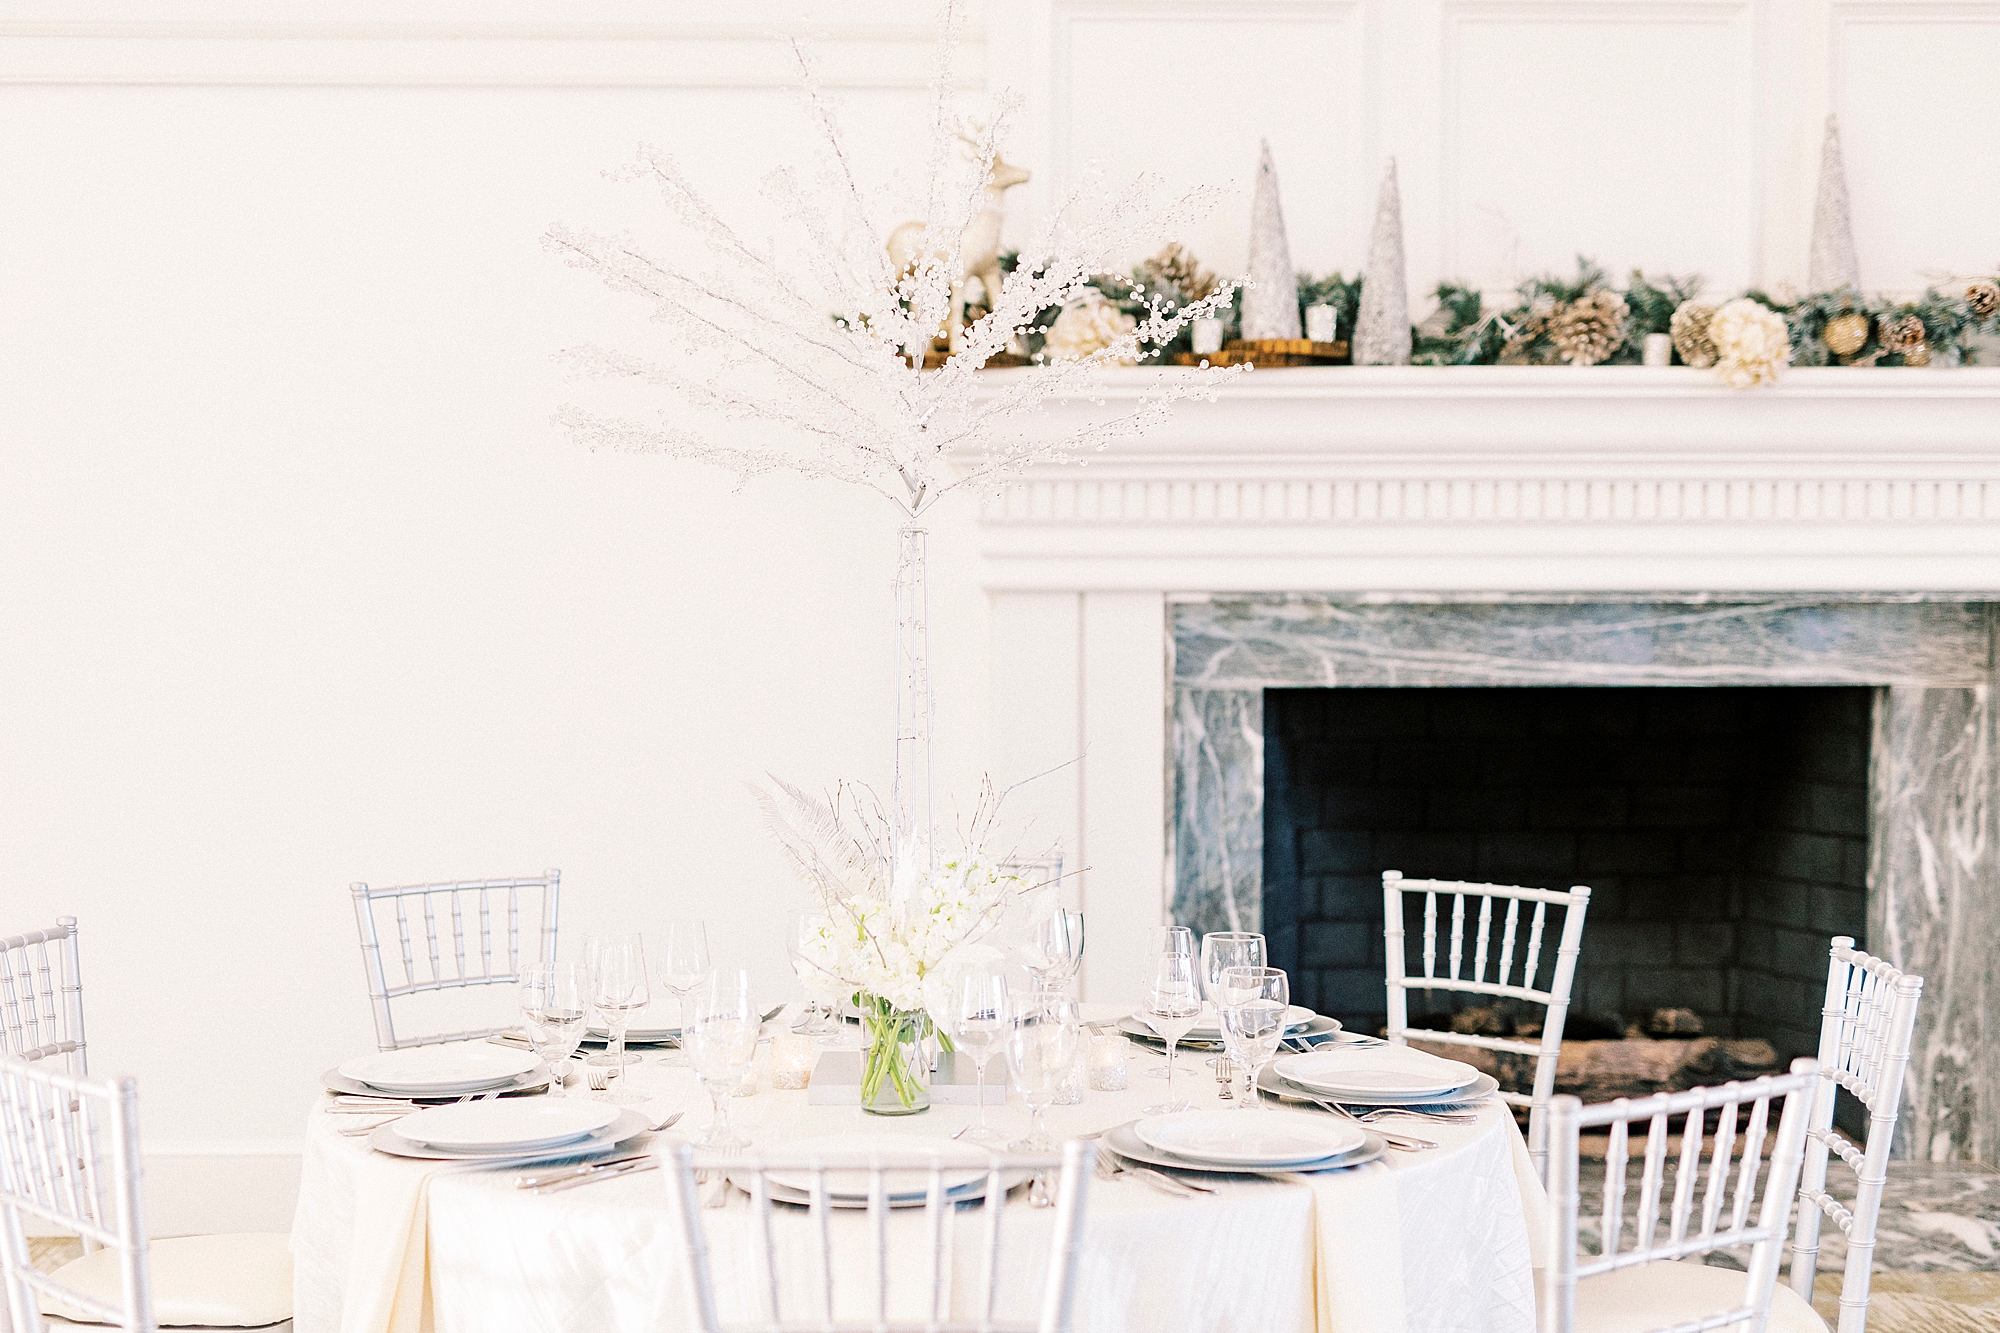 Winter Wonderland wedding at River Run Country Club with white and blue accents 